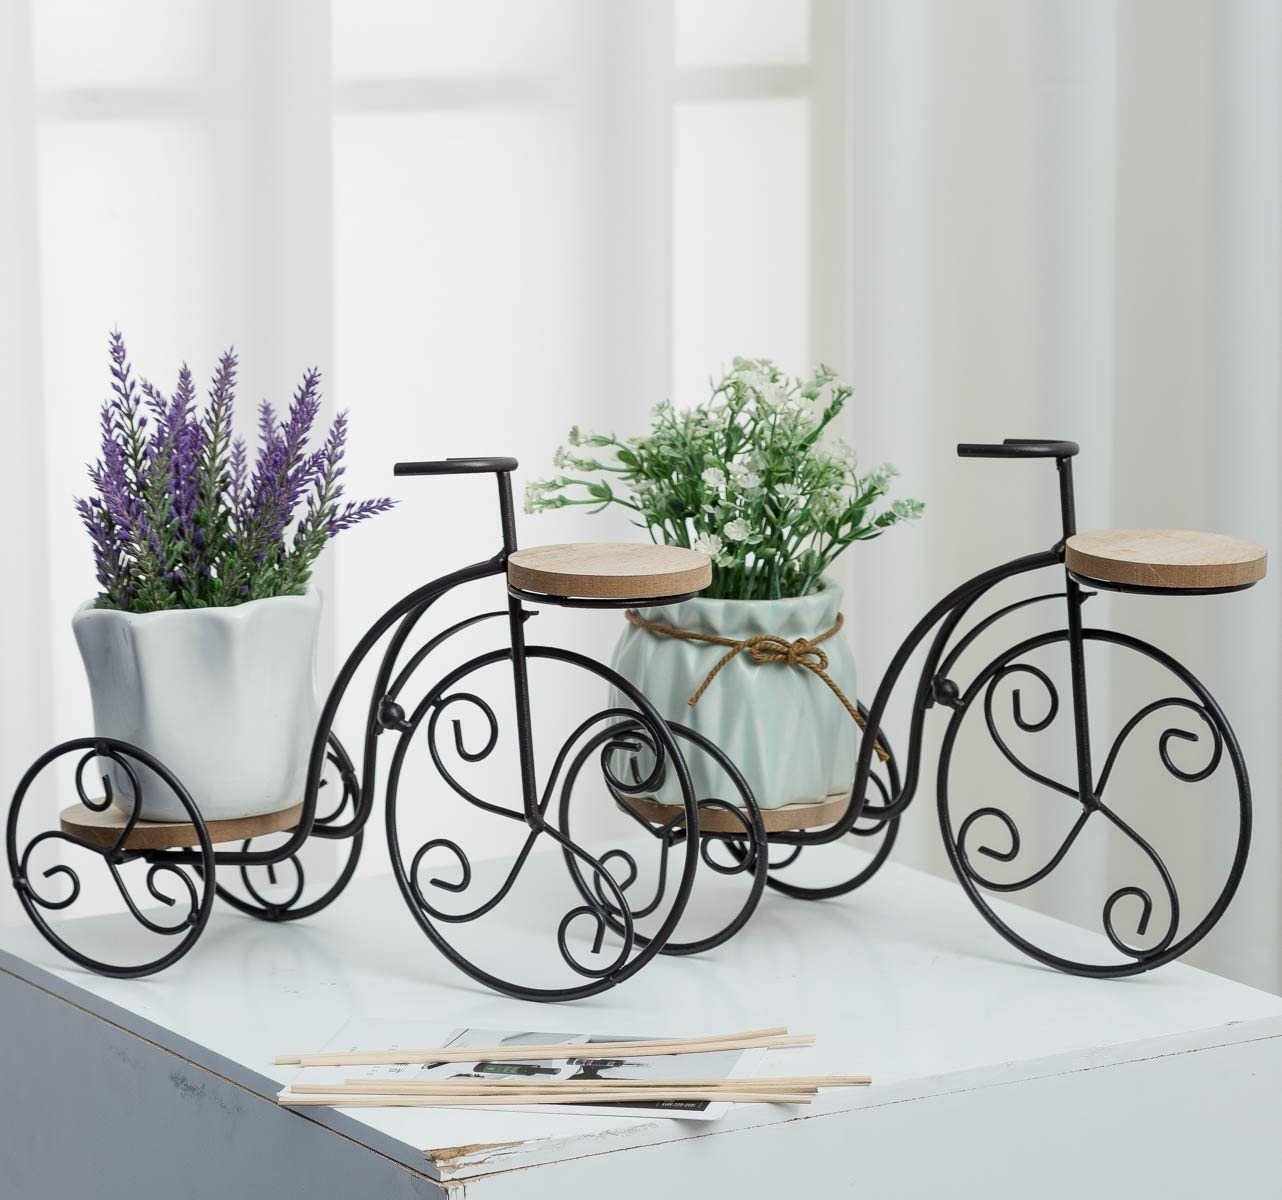 9. TJ Global 2-Plant Iron Bicycle Plant Stand